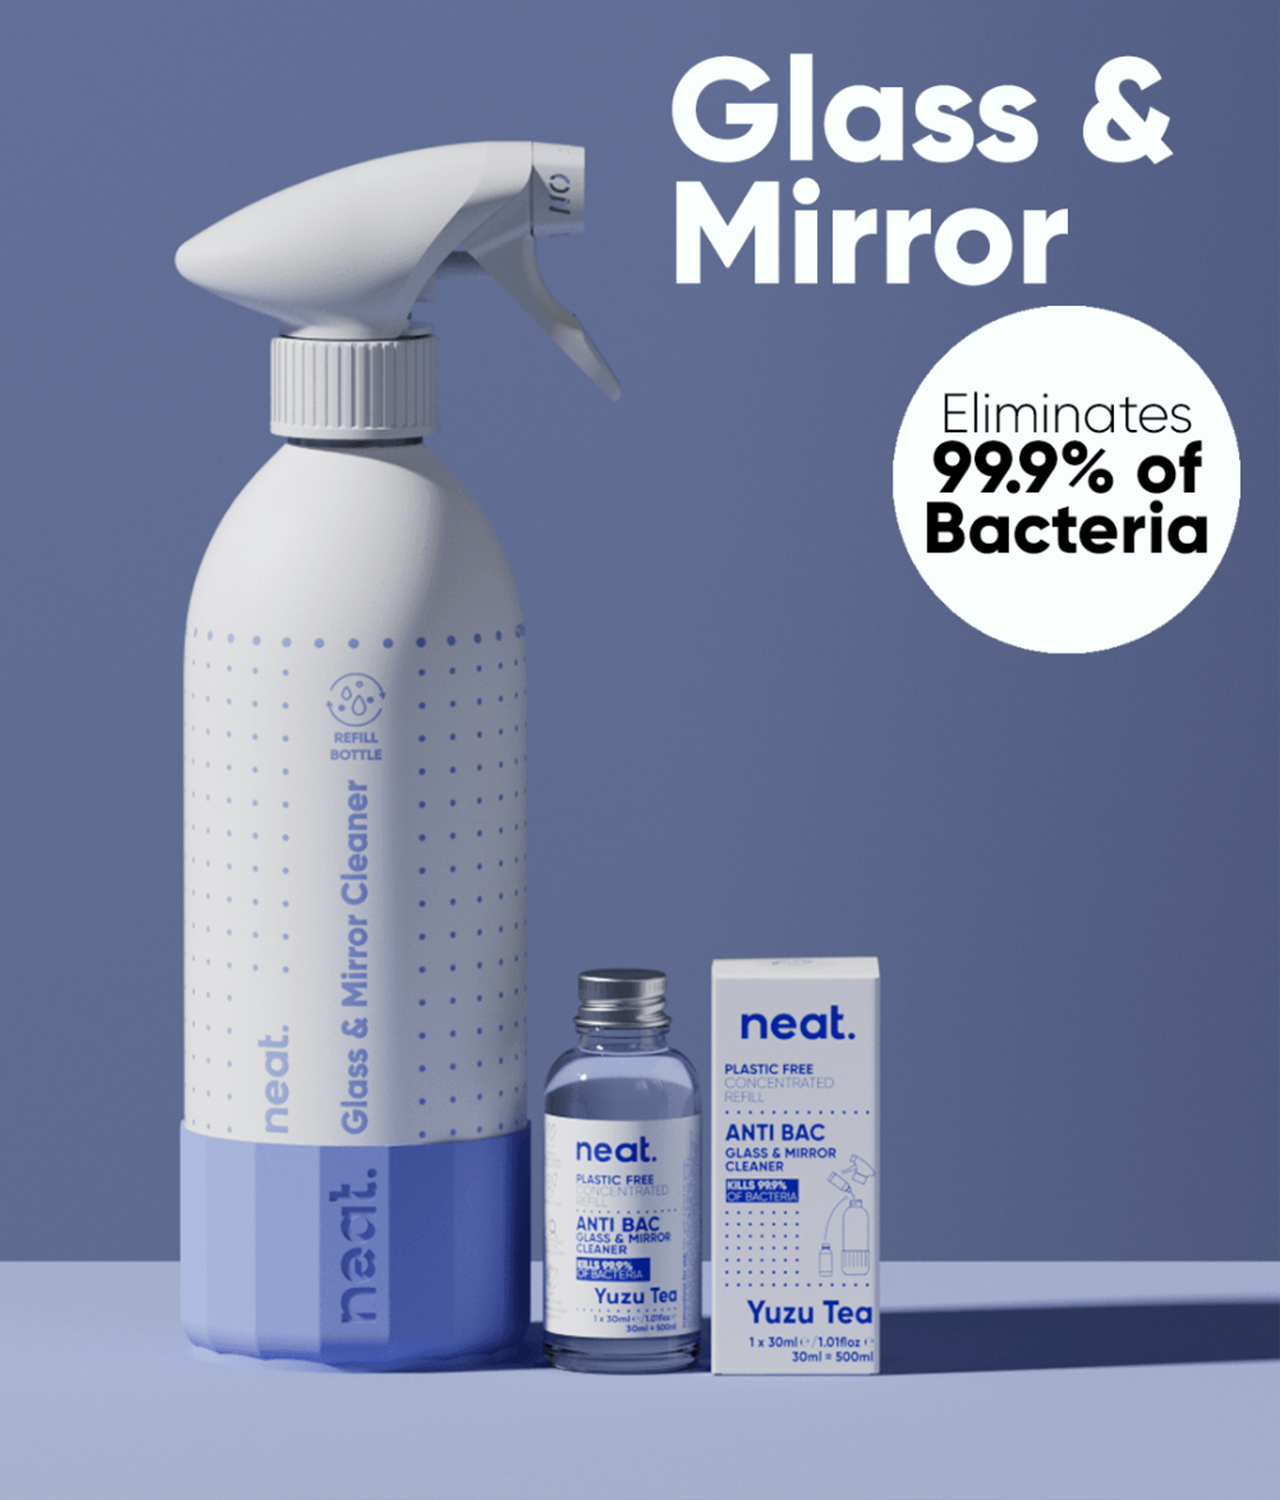 Neat Anti-Bac Glass & Mirror Cleaner